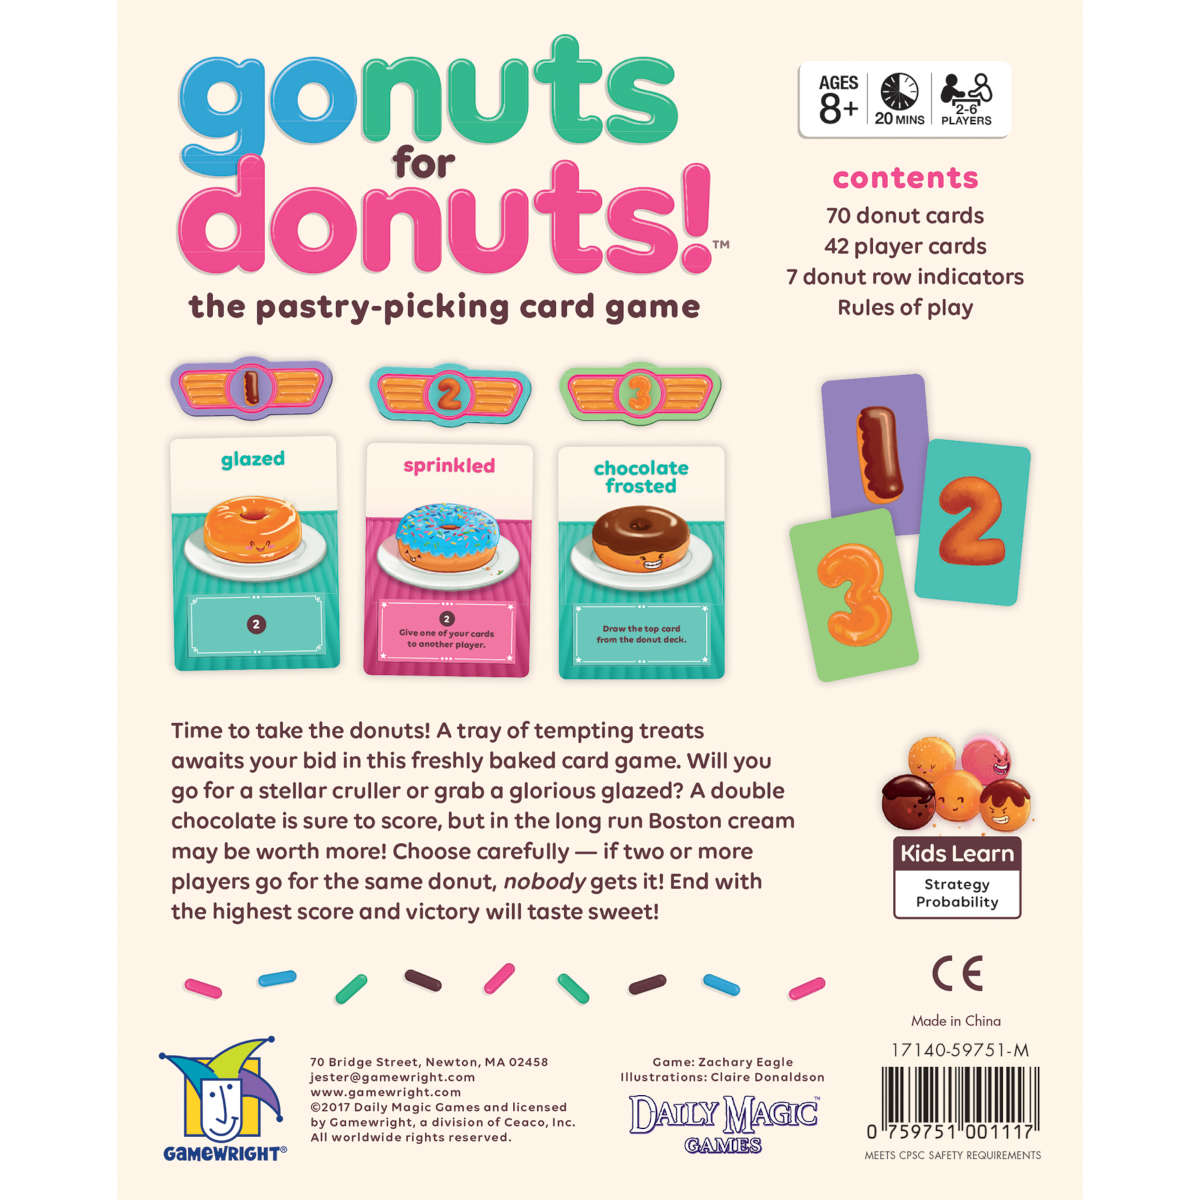 Gamewright Go Nuts For Donuts